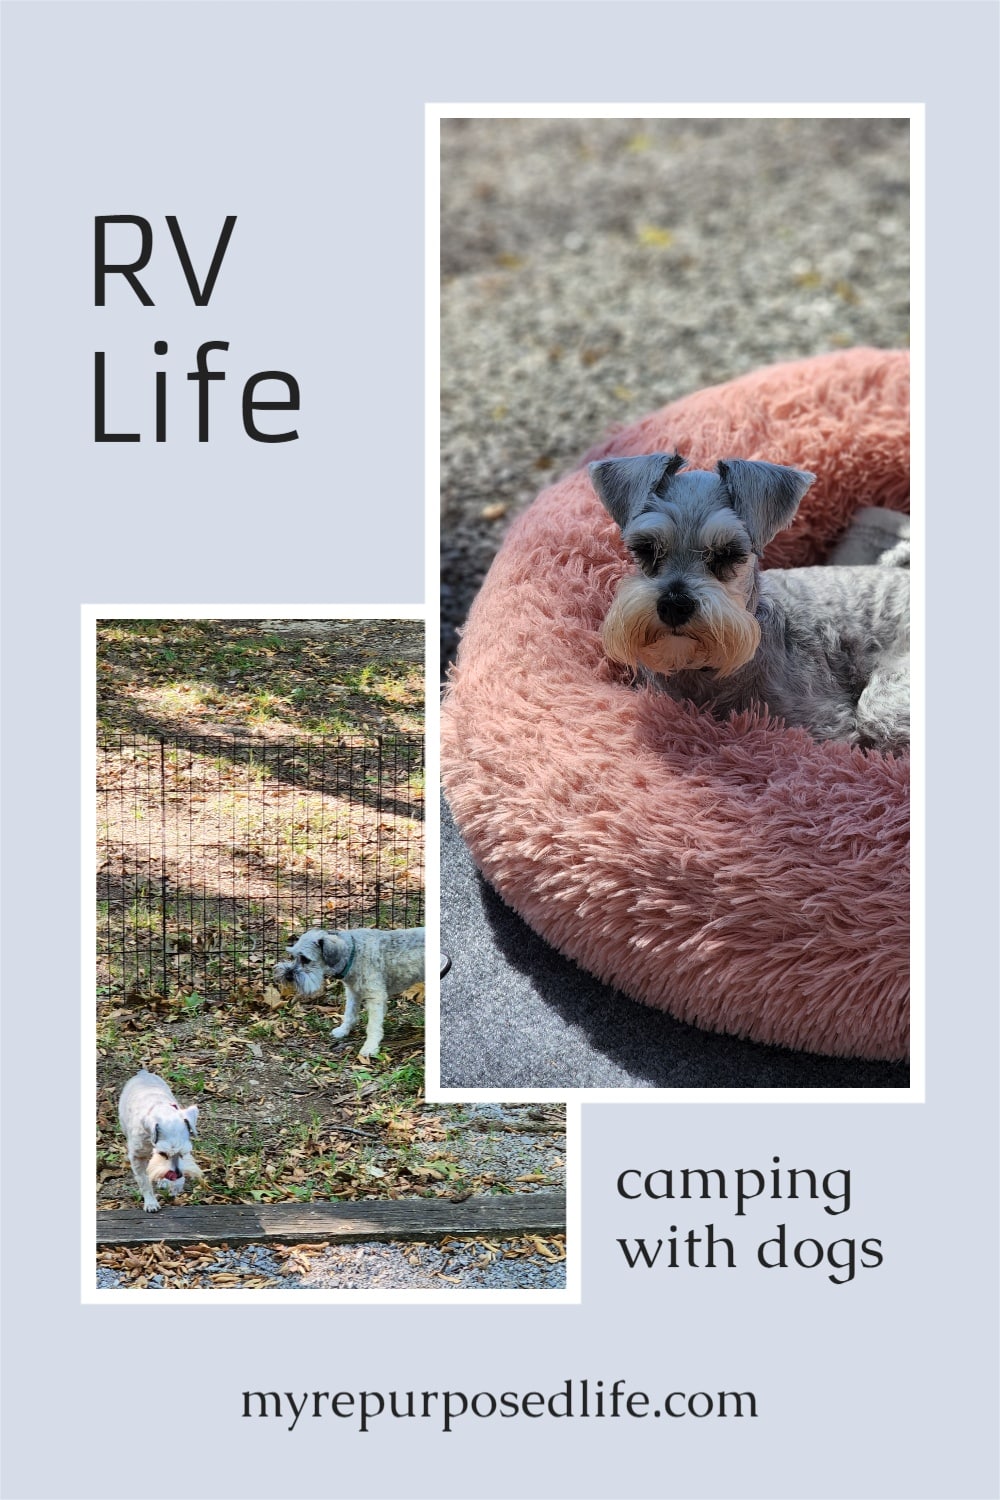 Camping with dogs can be quite rewarding, having man's (woman's) best friend along for the ride. Some aspects can be challenging, I'm here to help you with tips and tricks I've learned along the way. Lots of ideas to improve your experience. #RV #myrepurposedlife via @repurposedlife